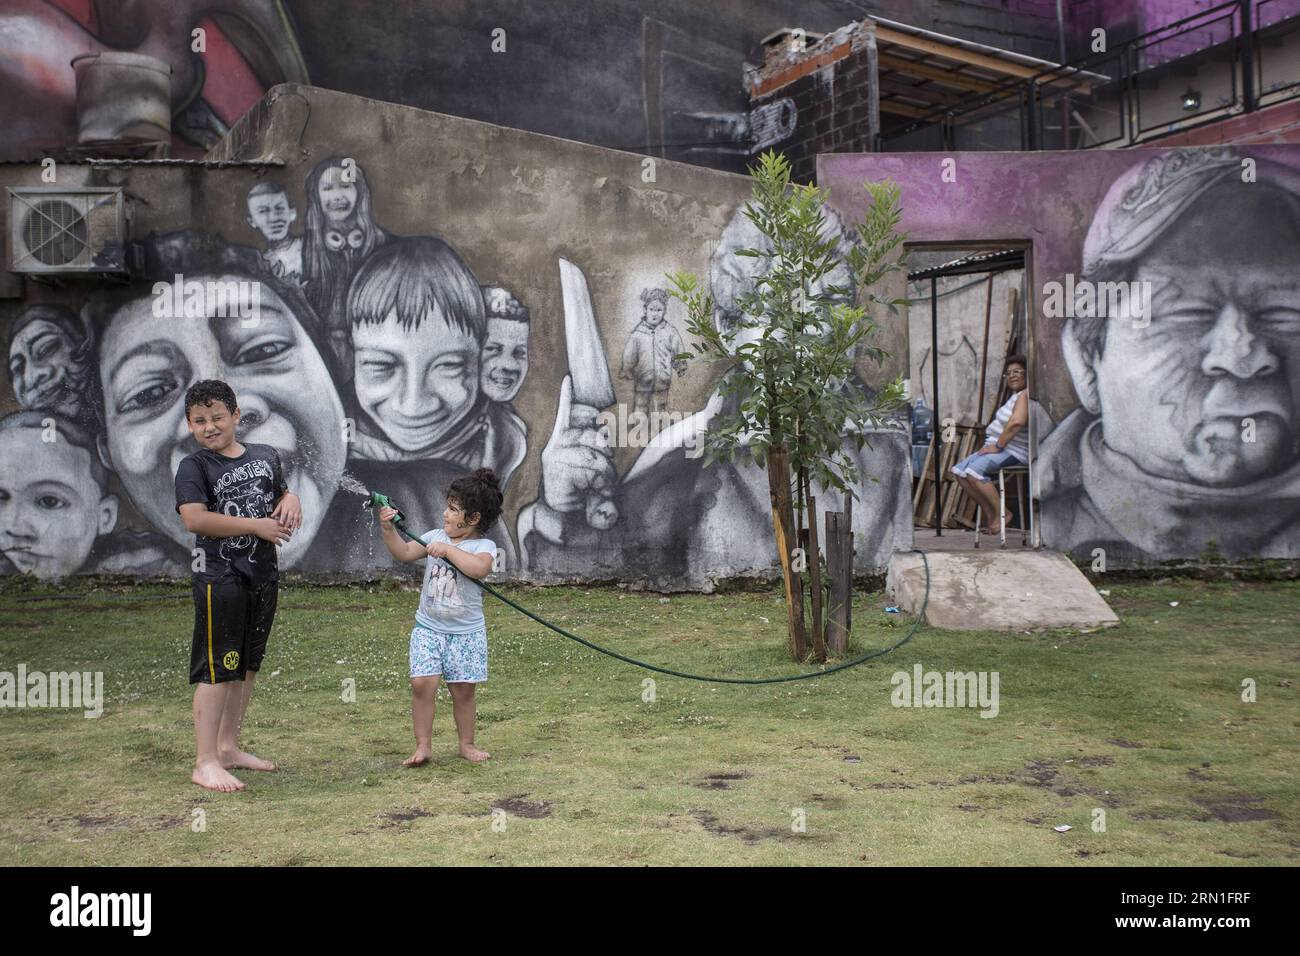 BUENOS AIRES, Dec. 27, 2014 -- Children play with water in front of the mural El Regreso de Quinquela , created by Argentine artist and urban muralist Alfredo Segatori, in Buenos Aires, Argentina, on Dec. 27, 2014. Made on a surface of over 2,000 square meters, the mural became on Saturday the largest in the world, according to local press. Martin Zabala)(zhf) ARGENTINA-BUENOS AIRES-CULTURE-MURAL e MARTINxZABALA PUBLICATIONxNOTxINxCHN   Buenos Aires DEC 27 2014 Children Play With Water in Front of The Mural El Regreso de  Created by Argentine Artist and Urban muralist Alfredo  in Buenos Aires Stock Photo